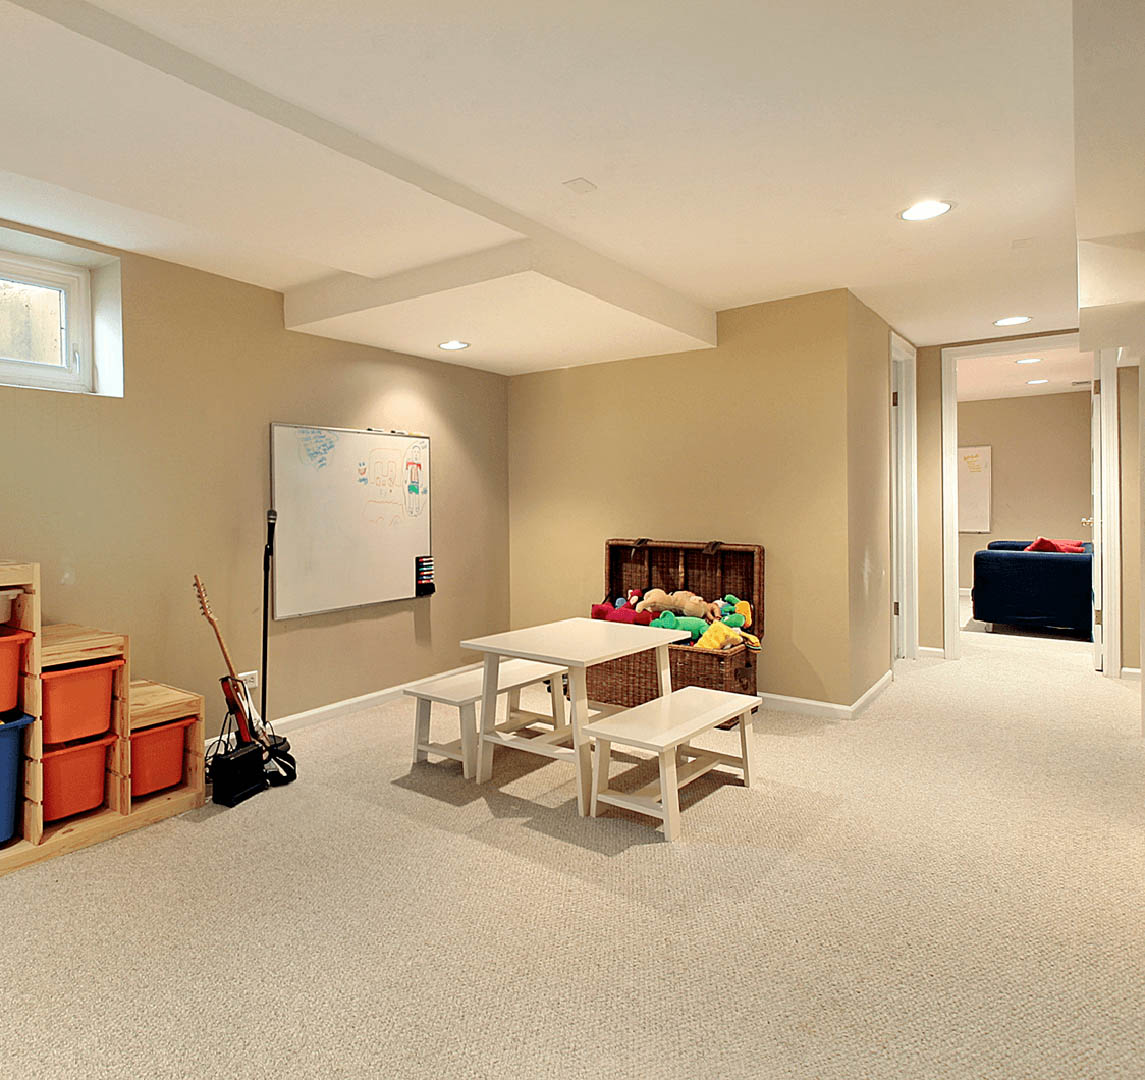 The Best Floor Plans for a Finished Basement Playroom Image